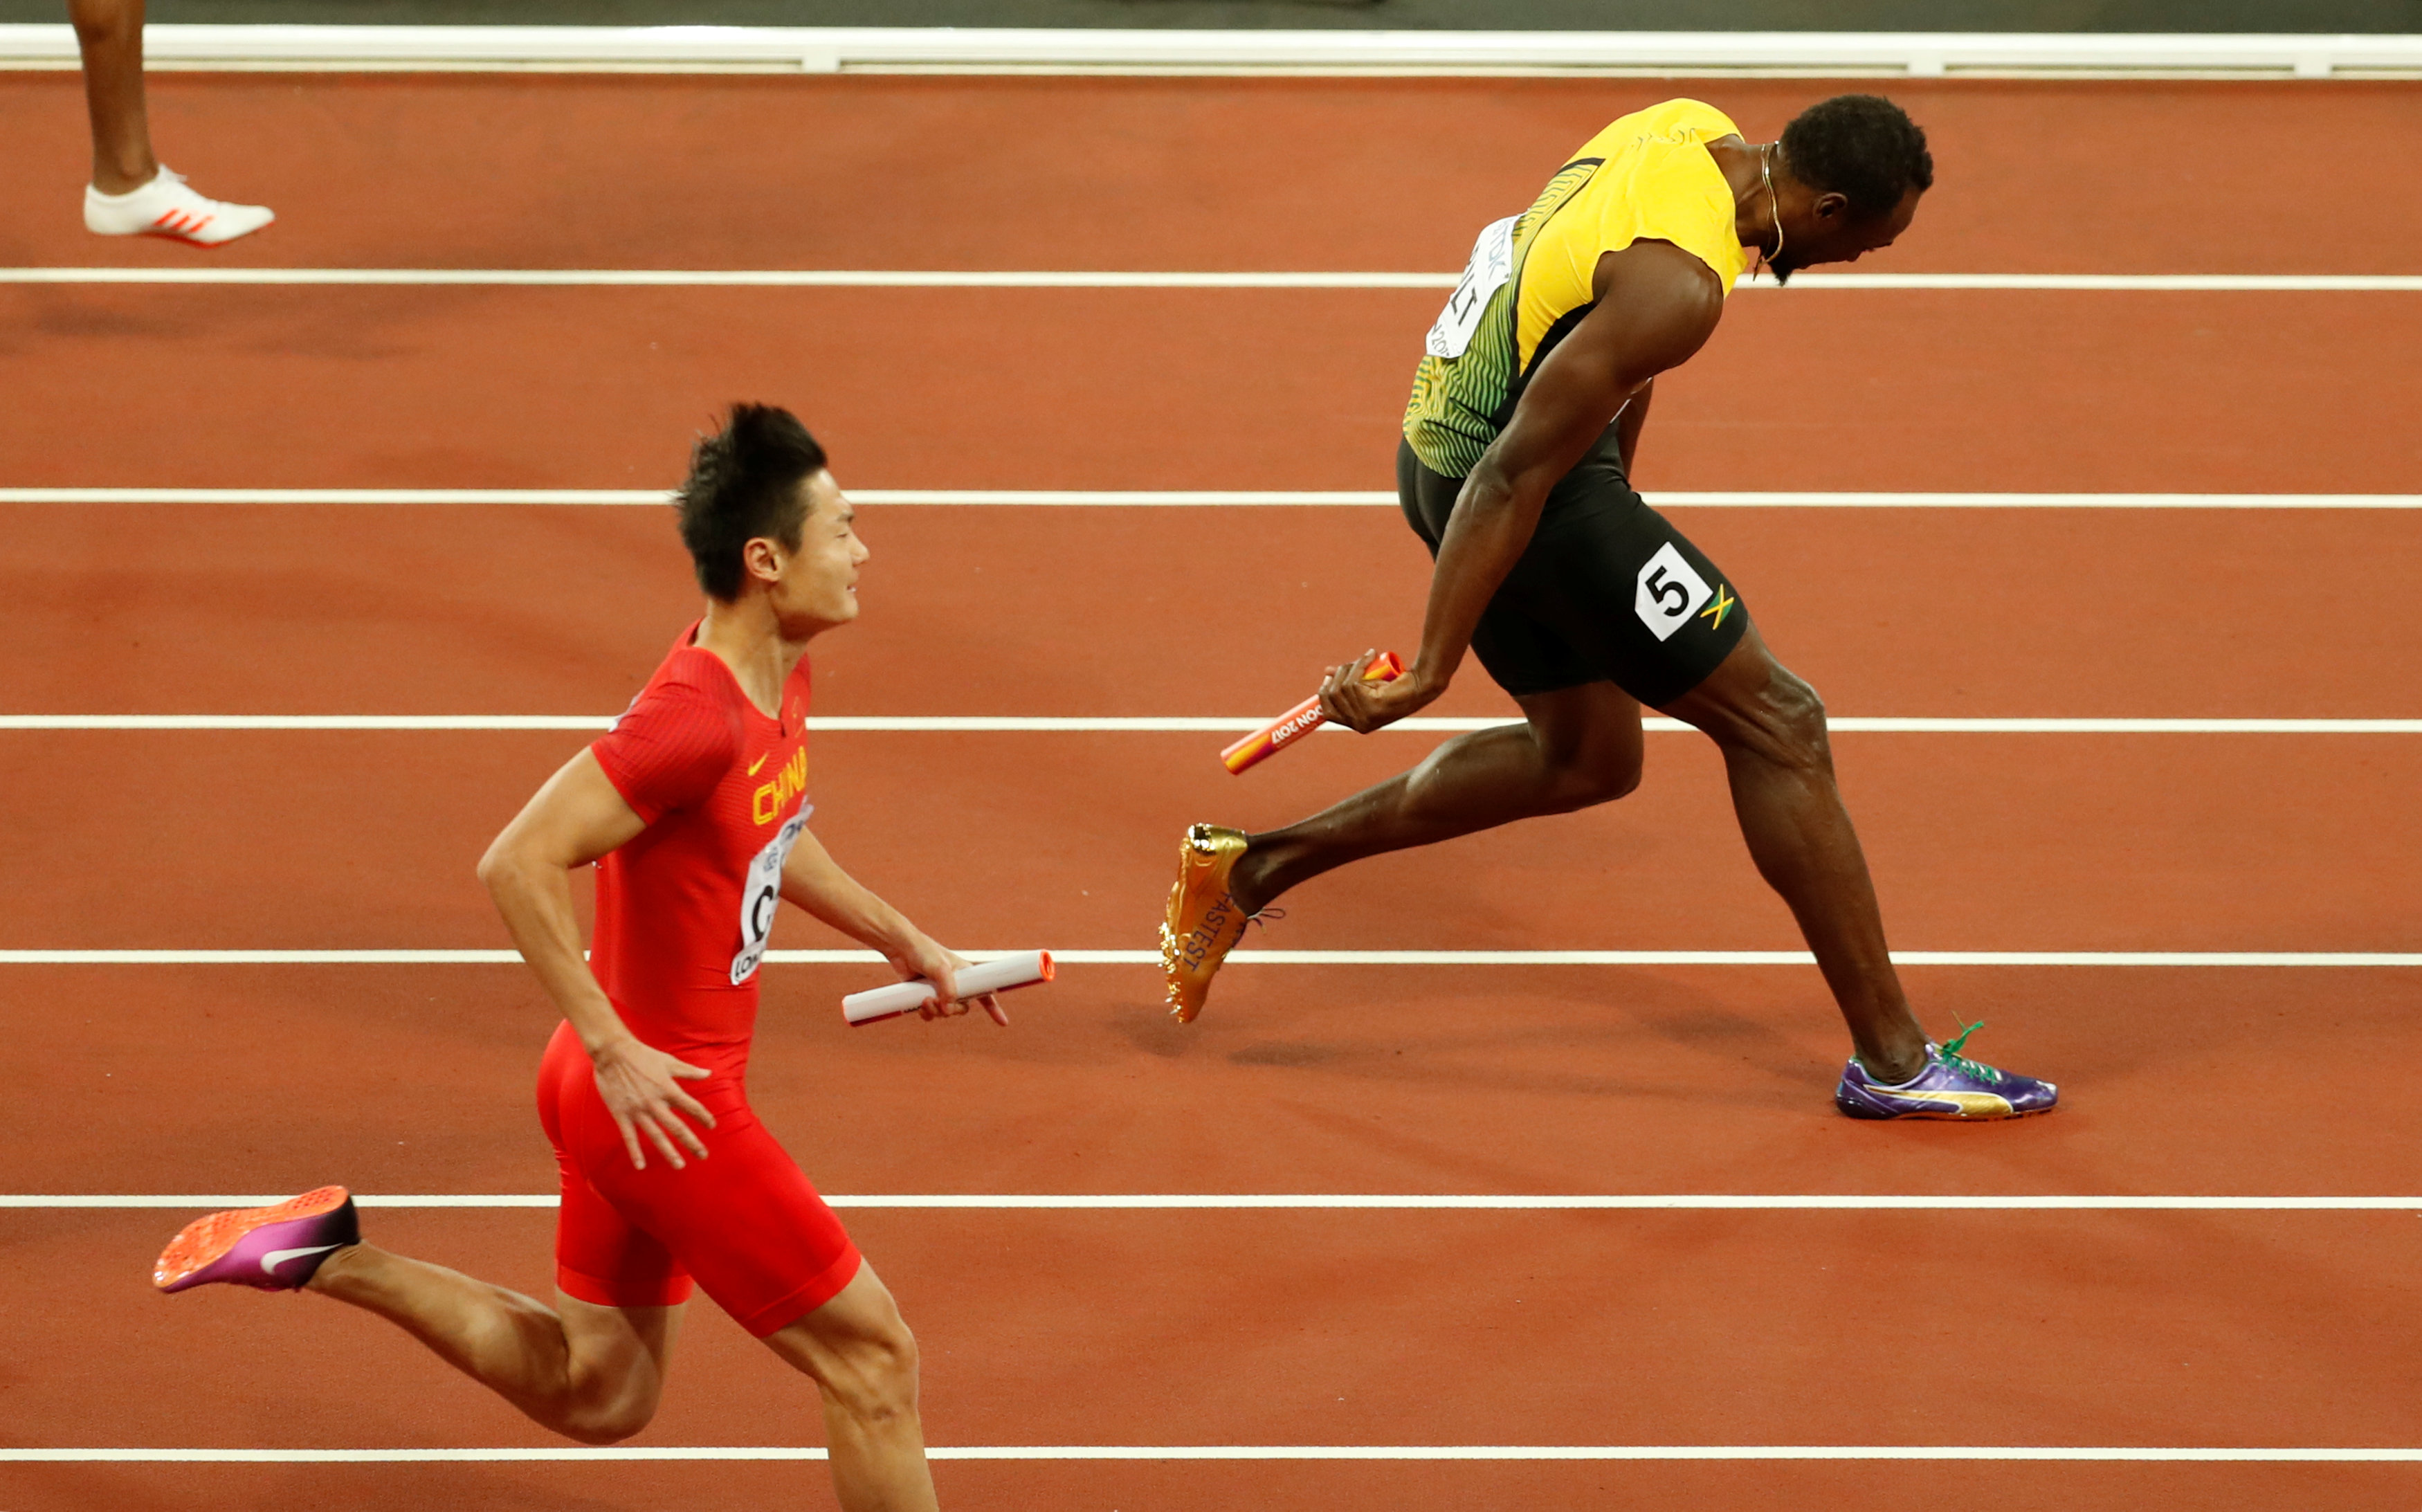 Bolt's running career ends in pain and agony